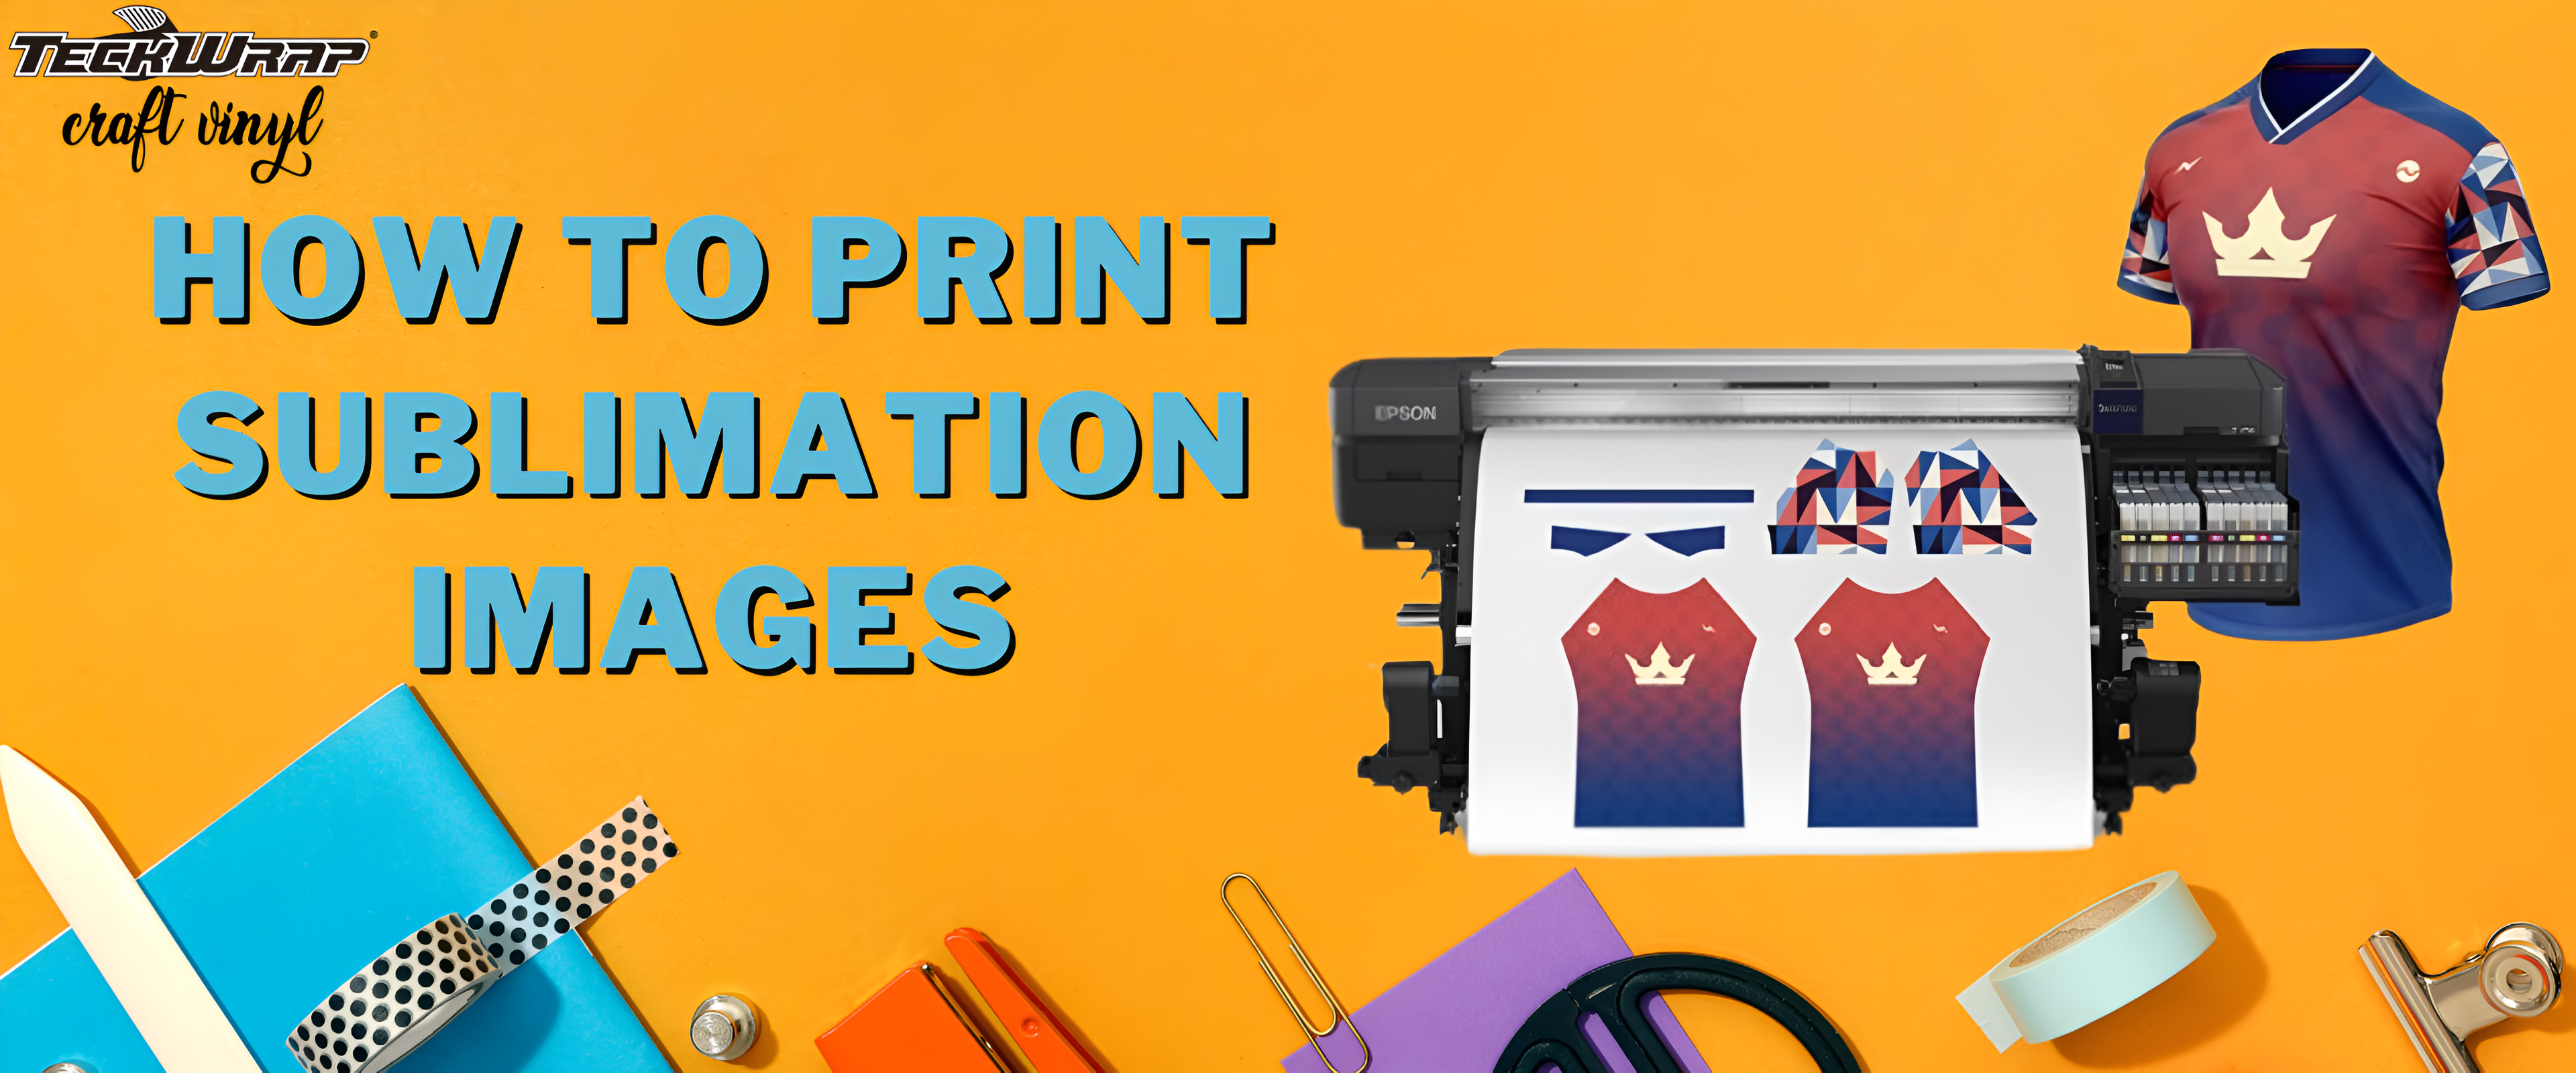 Heat Press Friendly Sublimation Blanks: Because Sublimation is